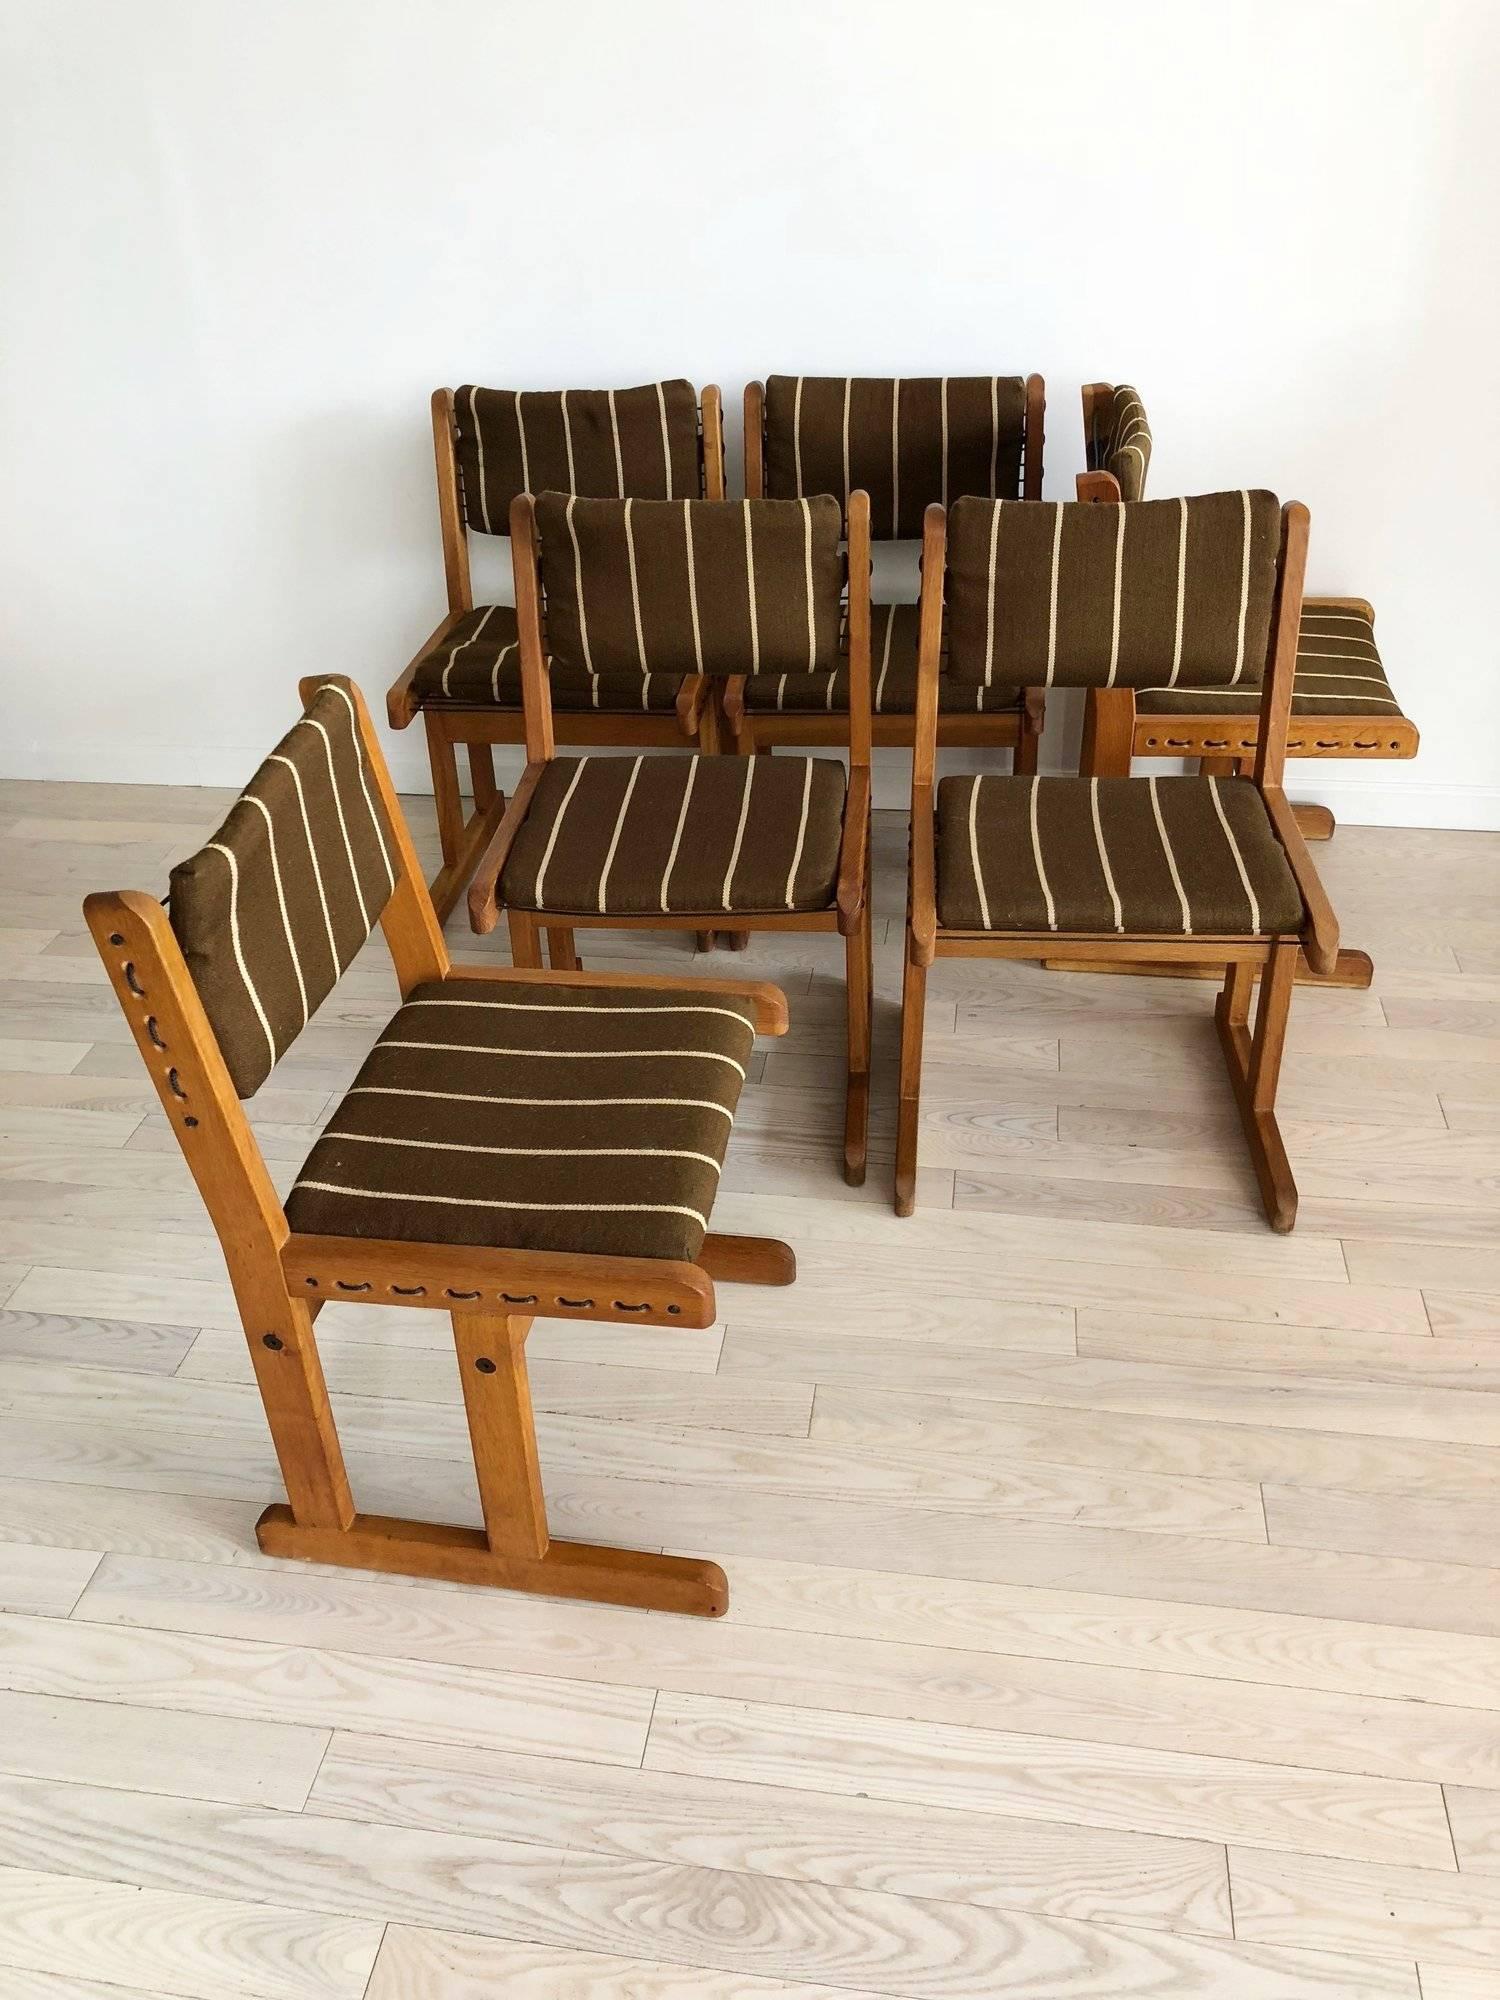 Set of six 1970s Danish dining chairs. Fumed oak with black rope cording. Removable brown wool striped cushions, leather attaches. Great profile! The chairs can be used with or without the cushions. 

Sold as a set of six only.